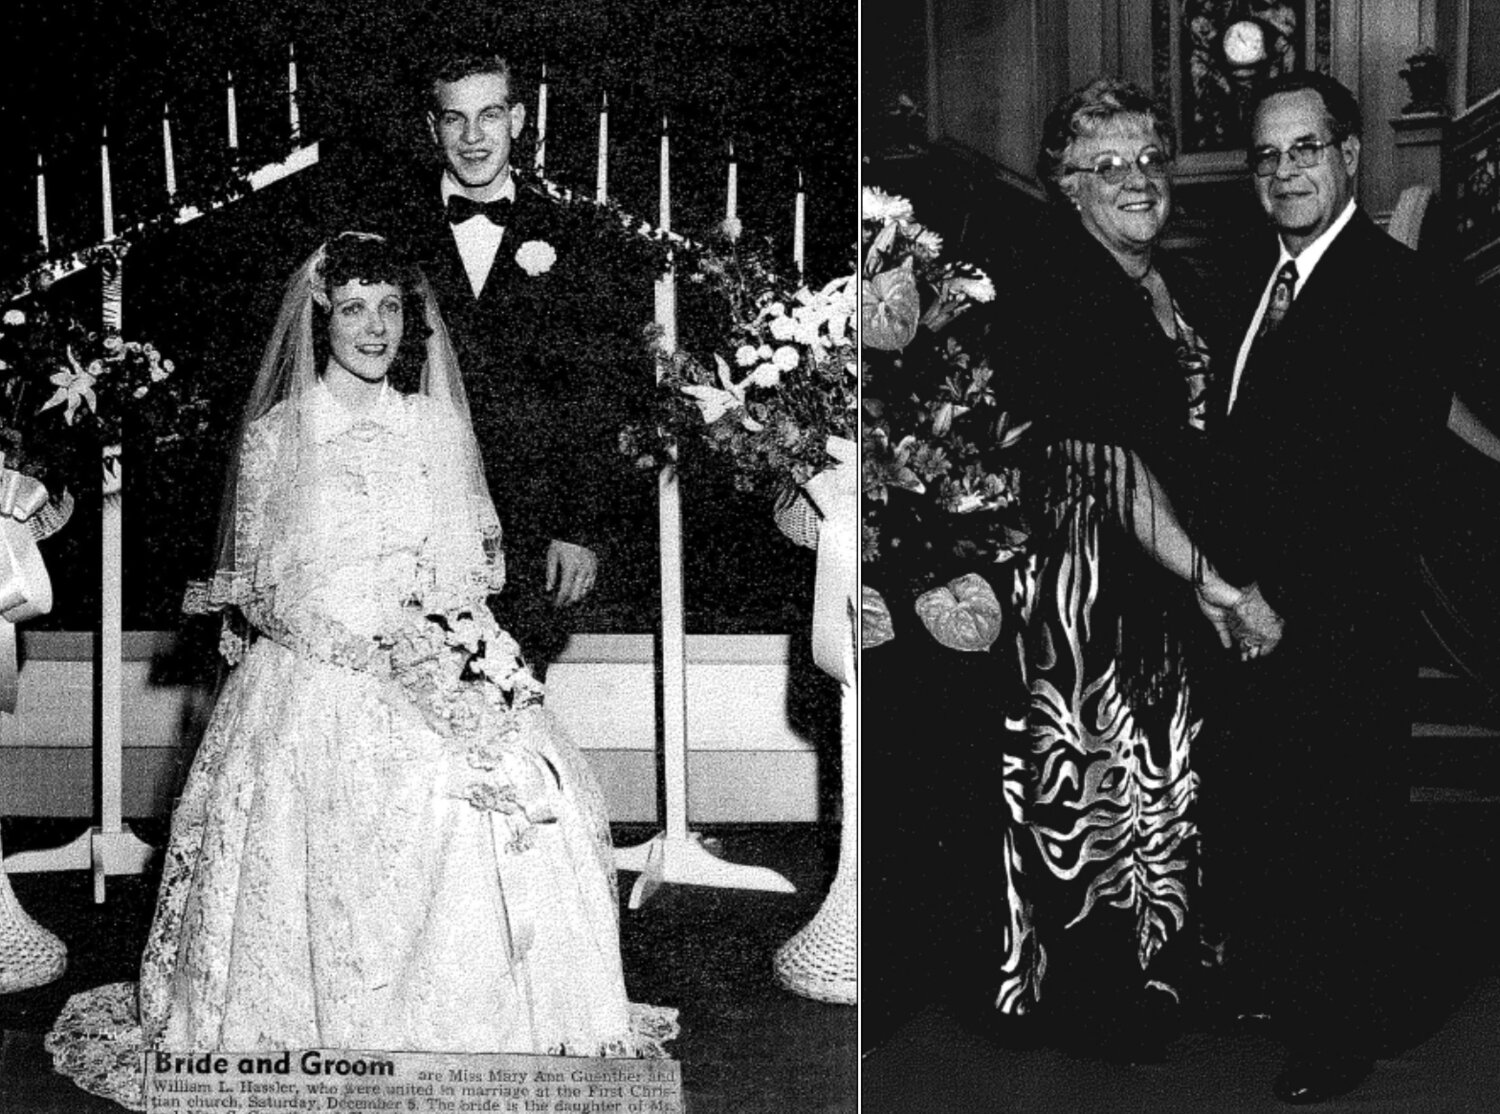 William L. “Bill”  and Mary Ann Hassler are pictured at their wedding in 1953 and in 2003 in these photos provided by their family.